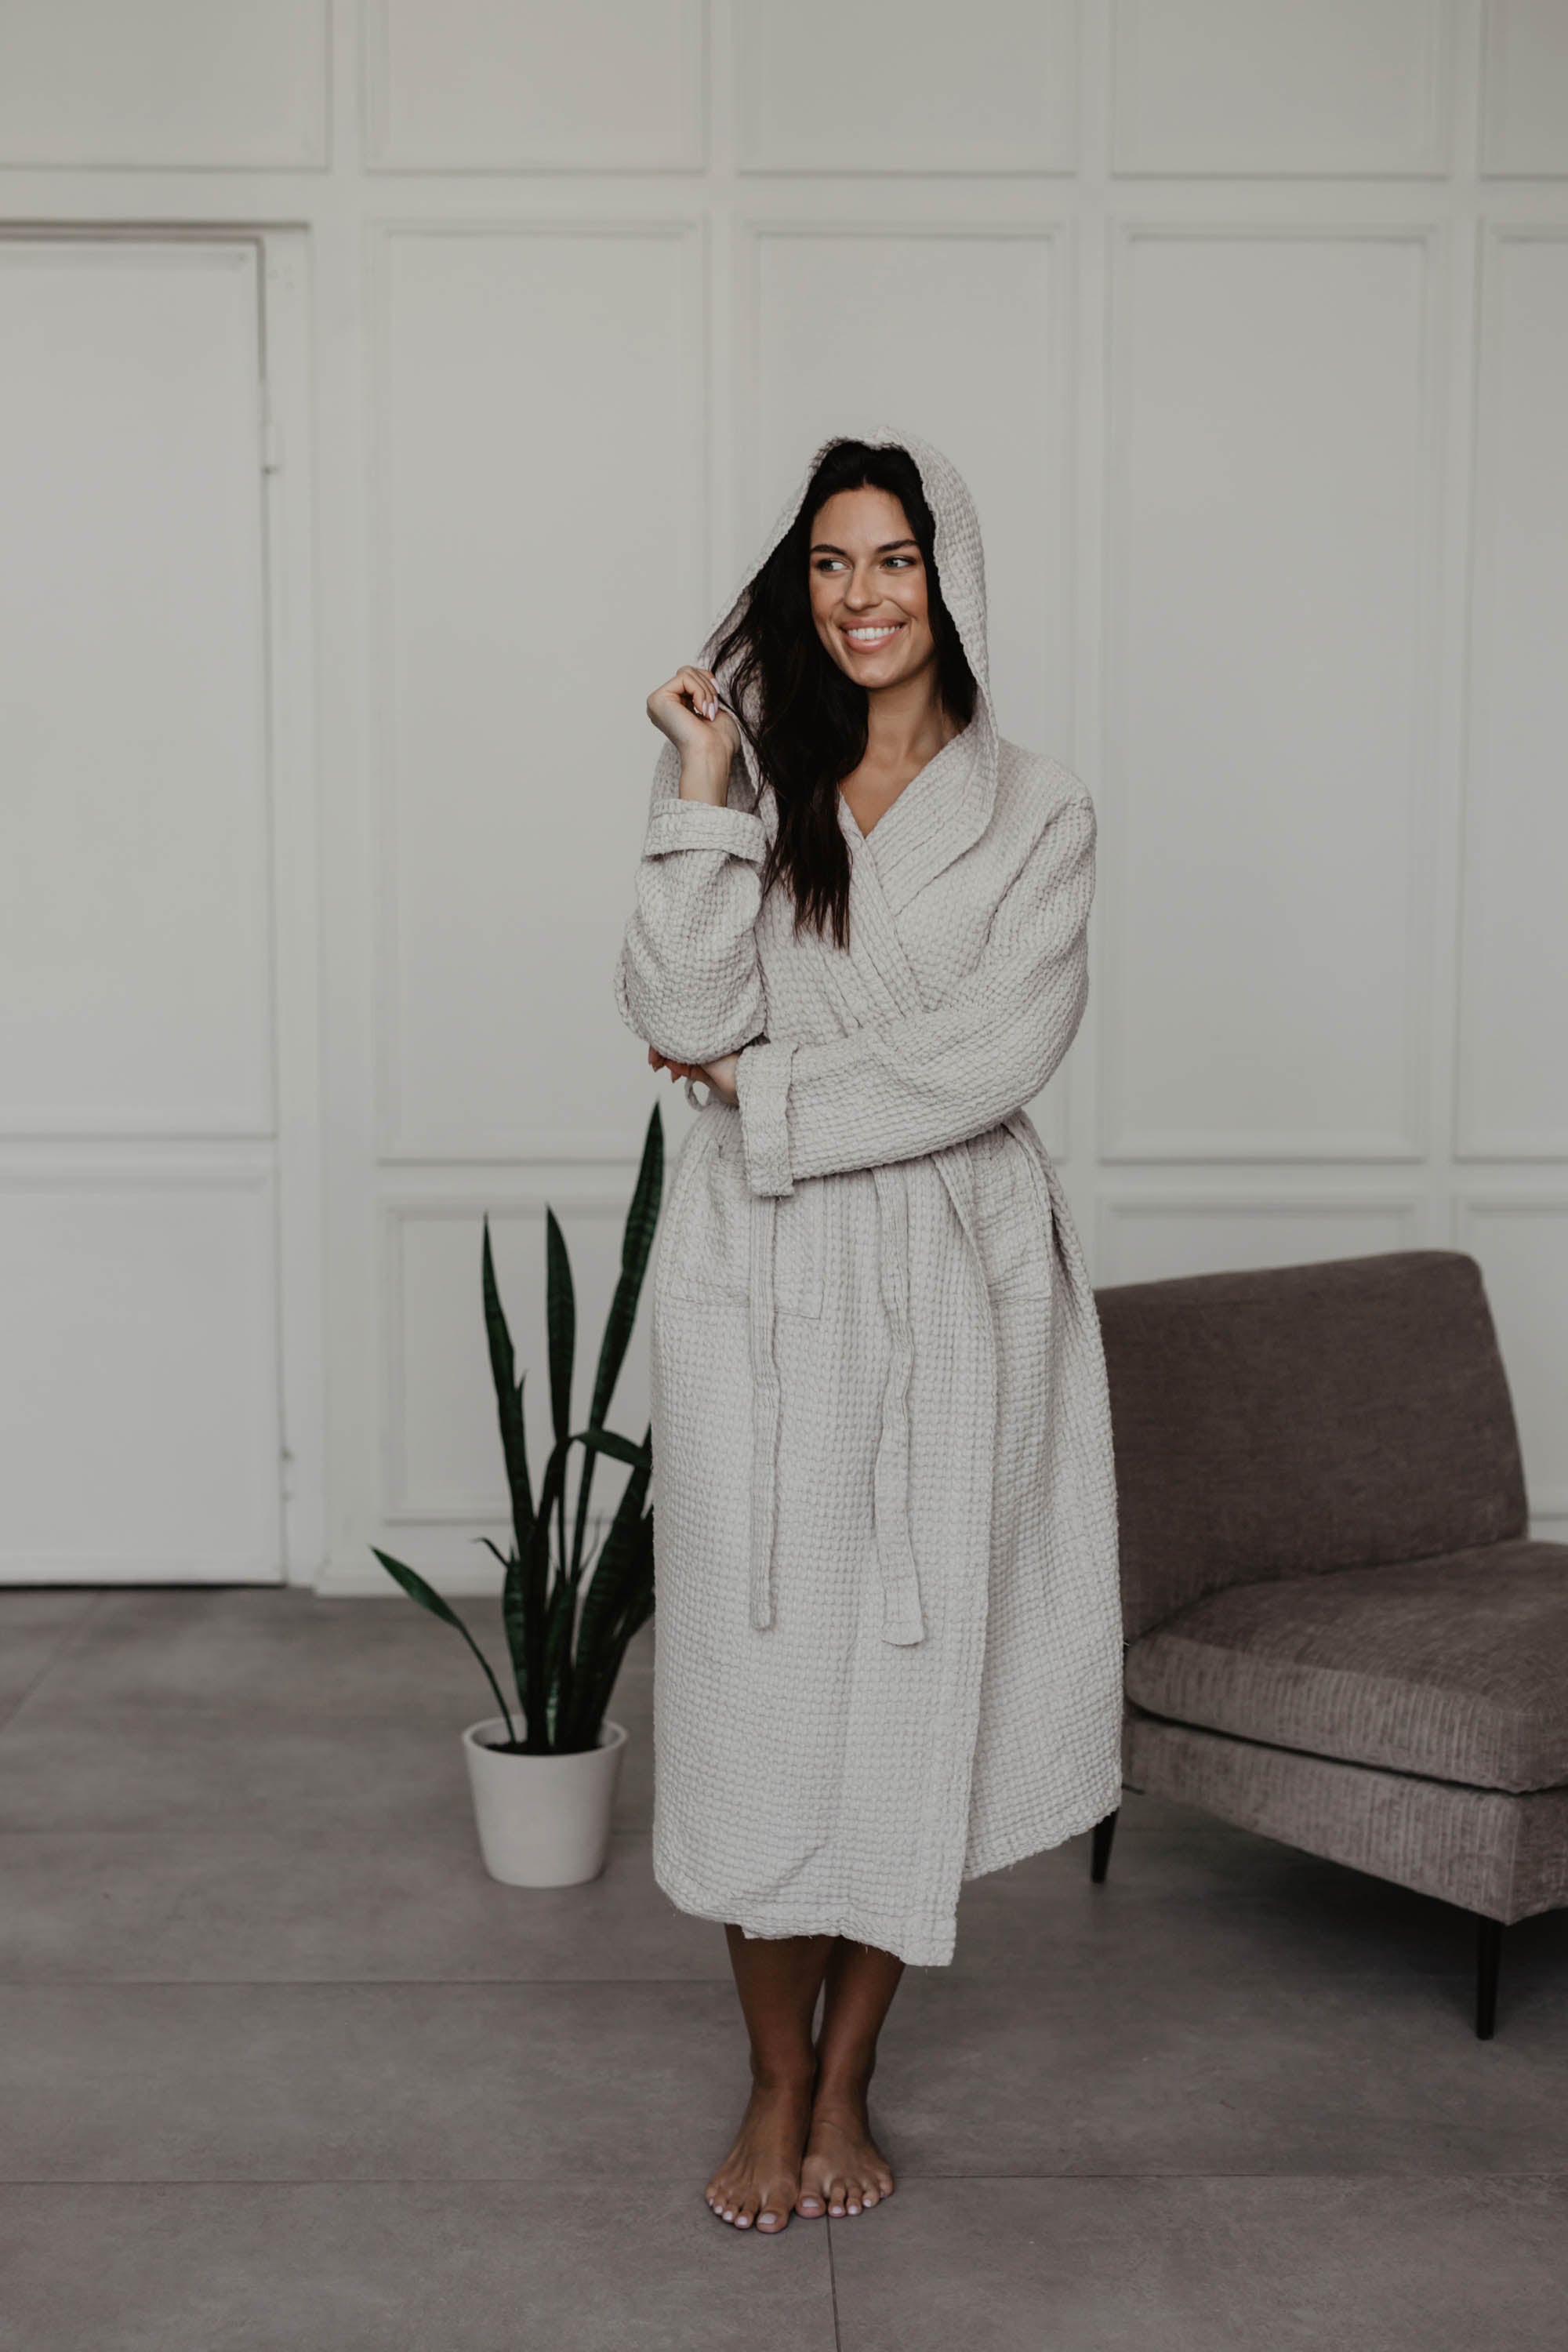 Woman Wearing A White Waffle Linen Bathrobe In A White Room